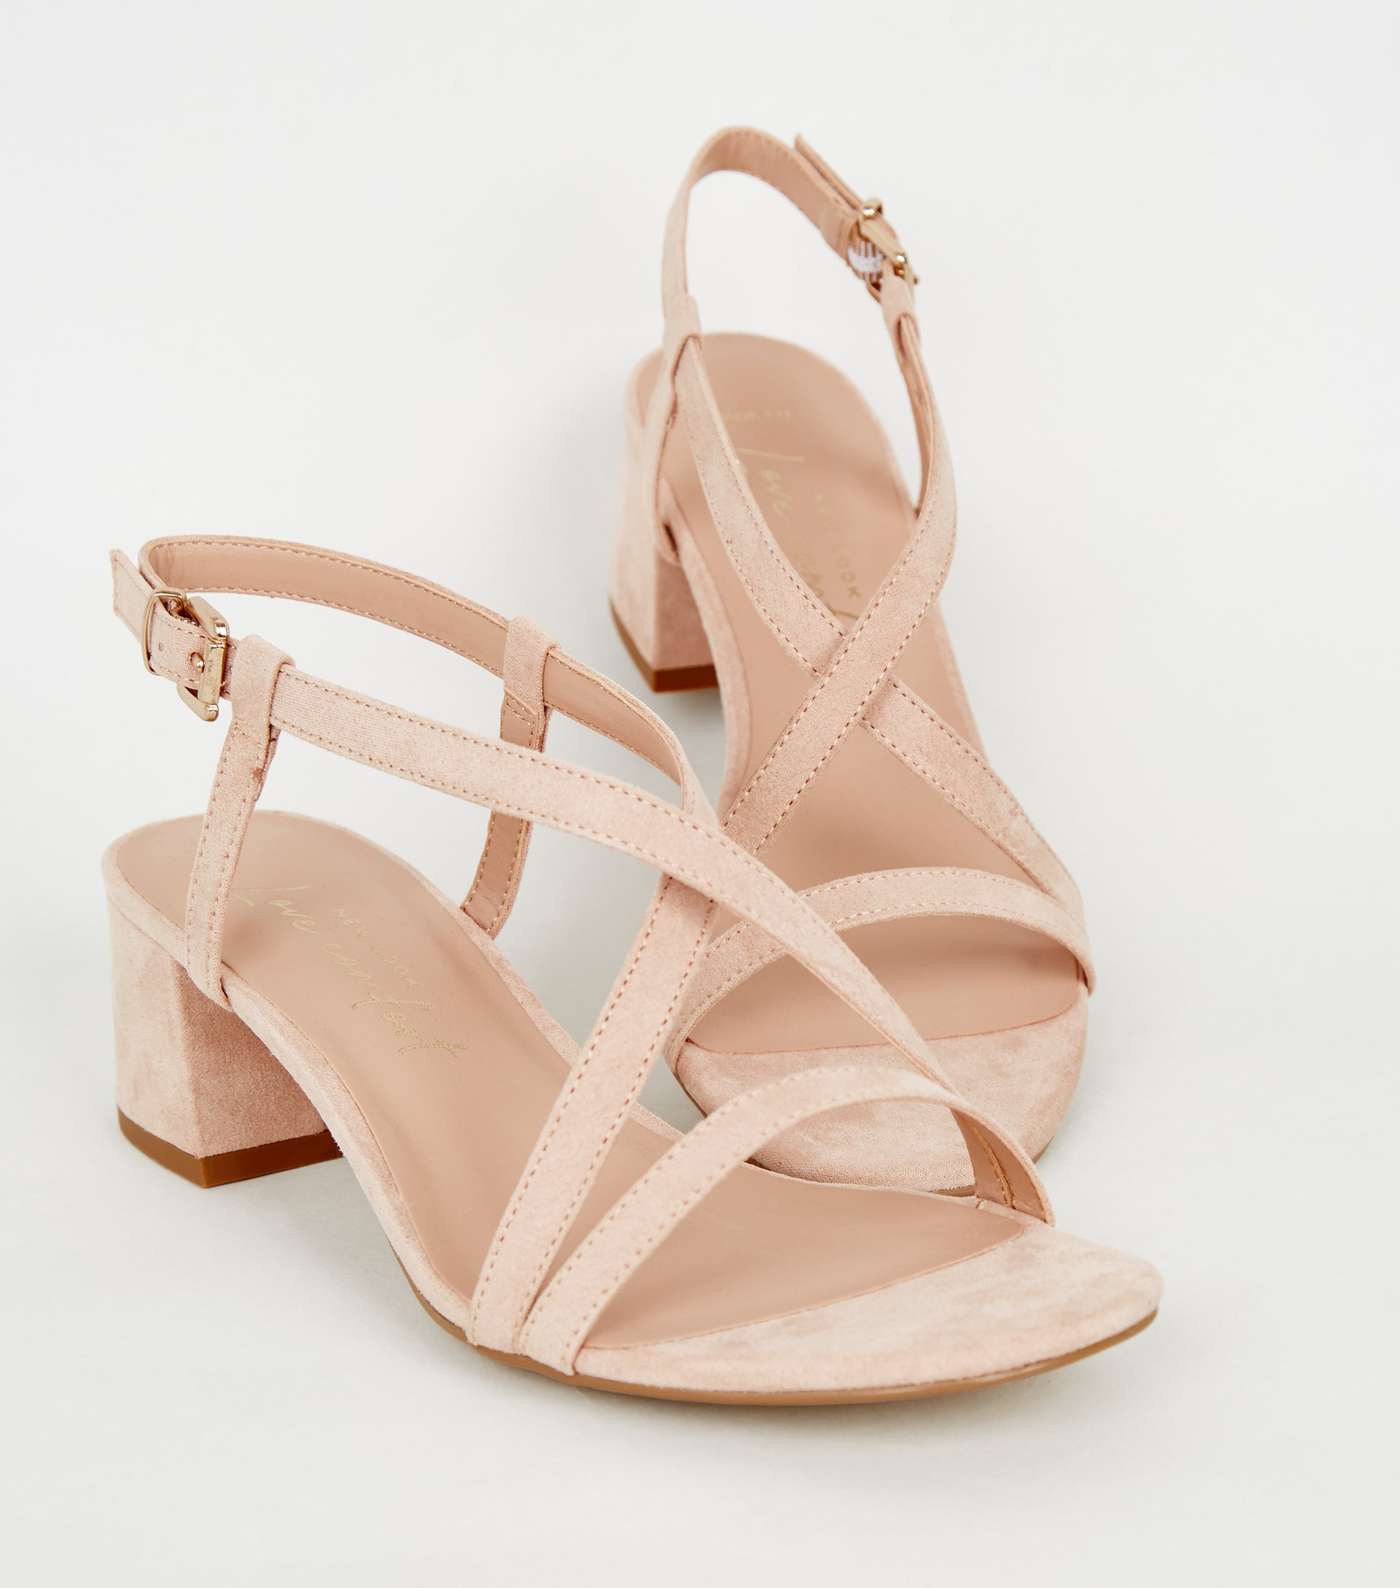 Wide Fit Pale Pink Suedette Strappy Low Heel Sandals Image 3